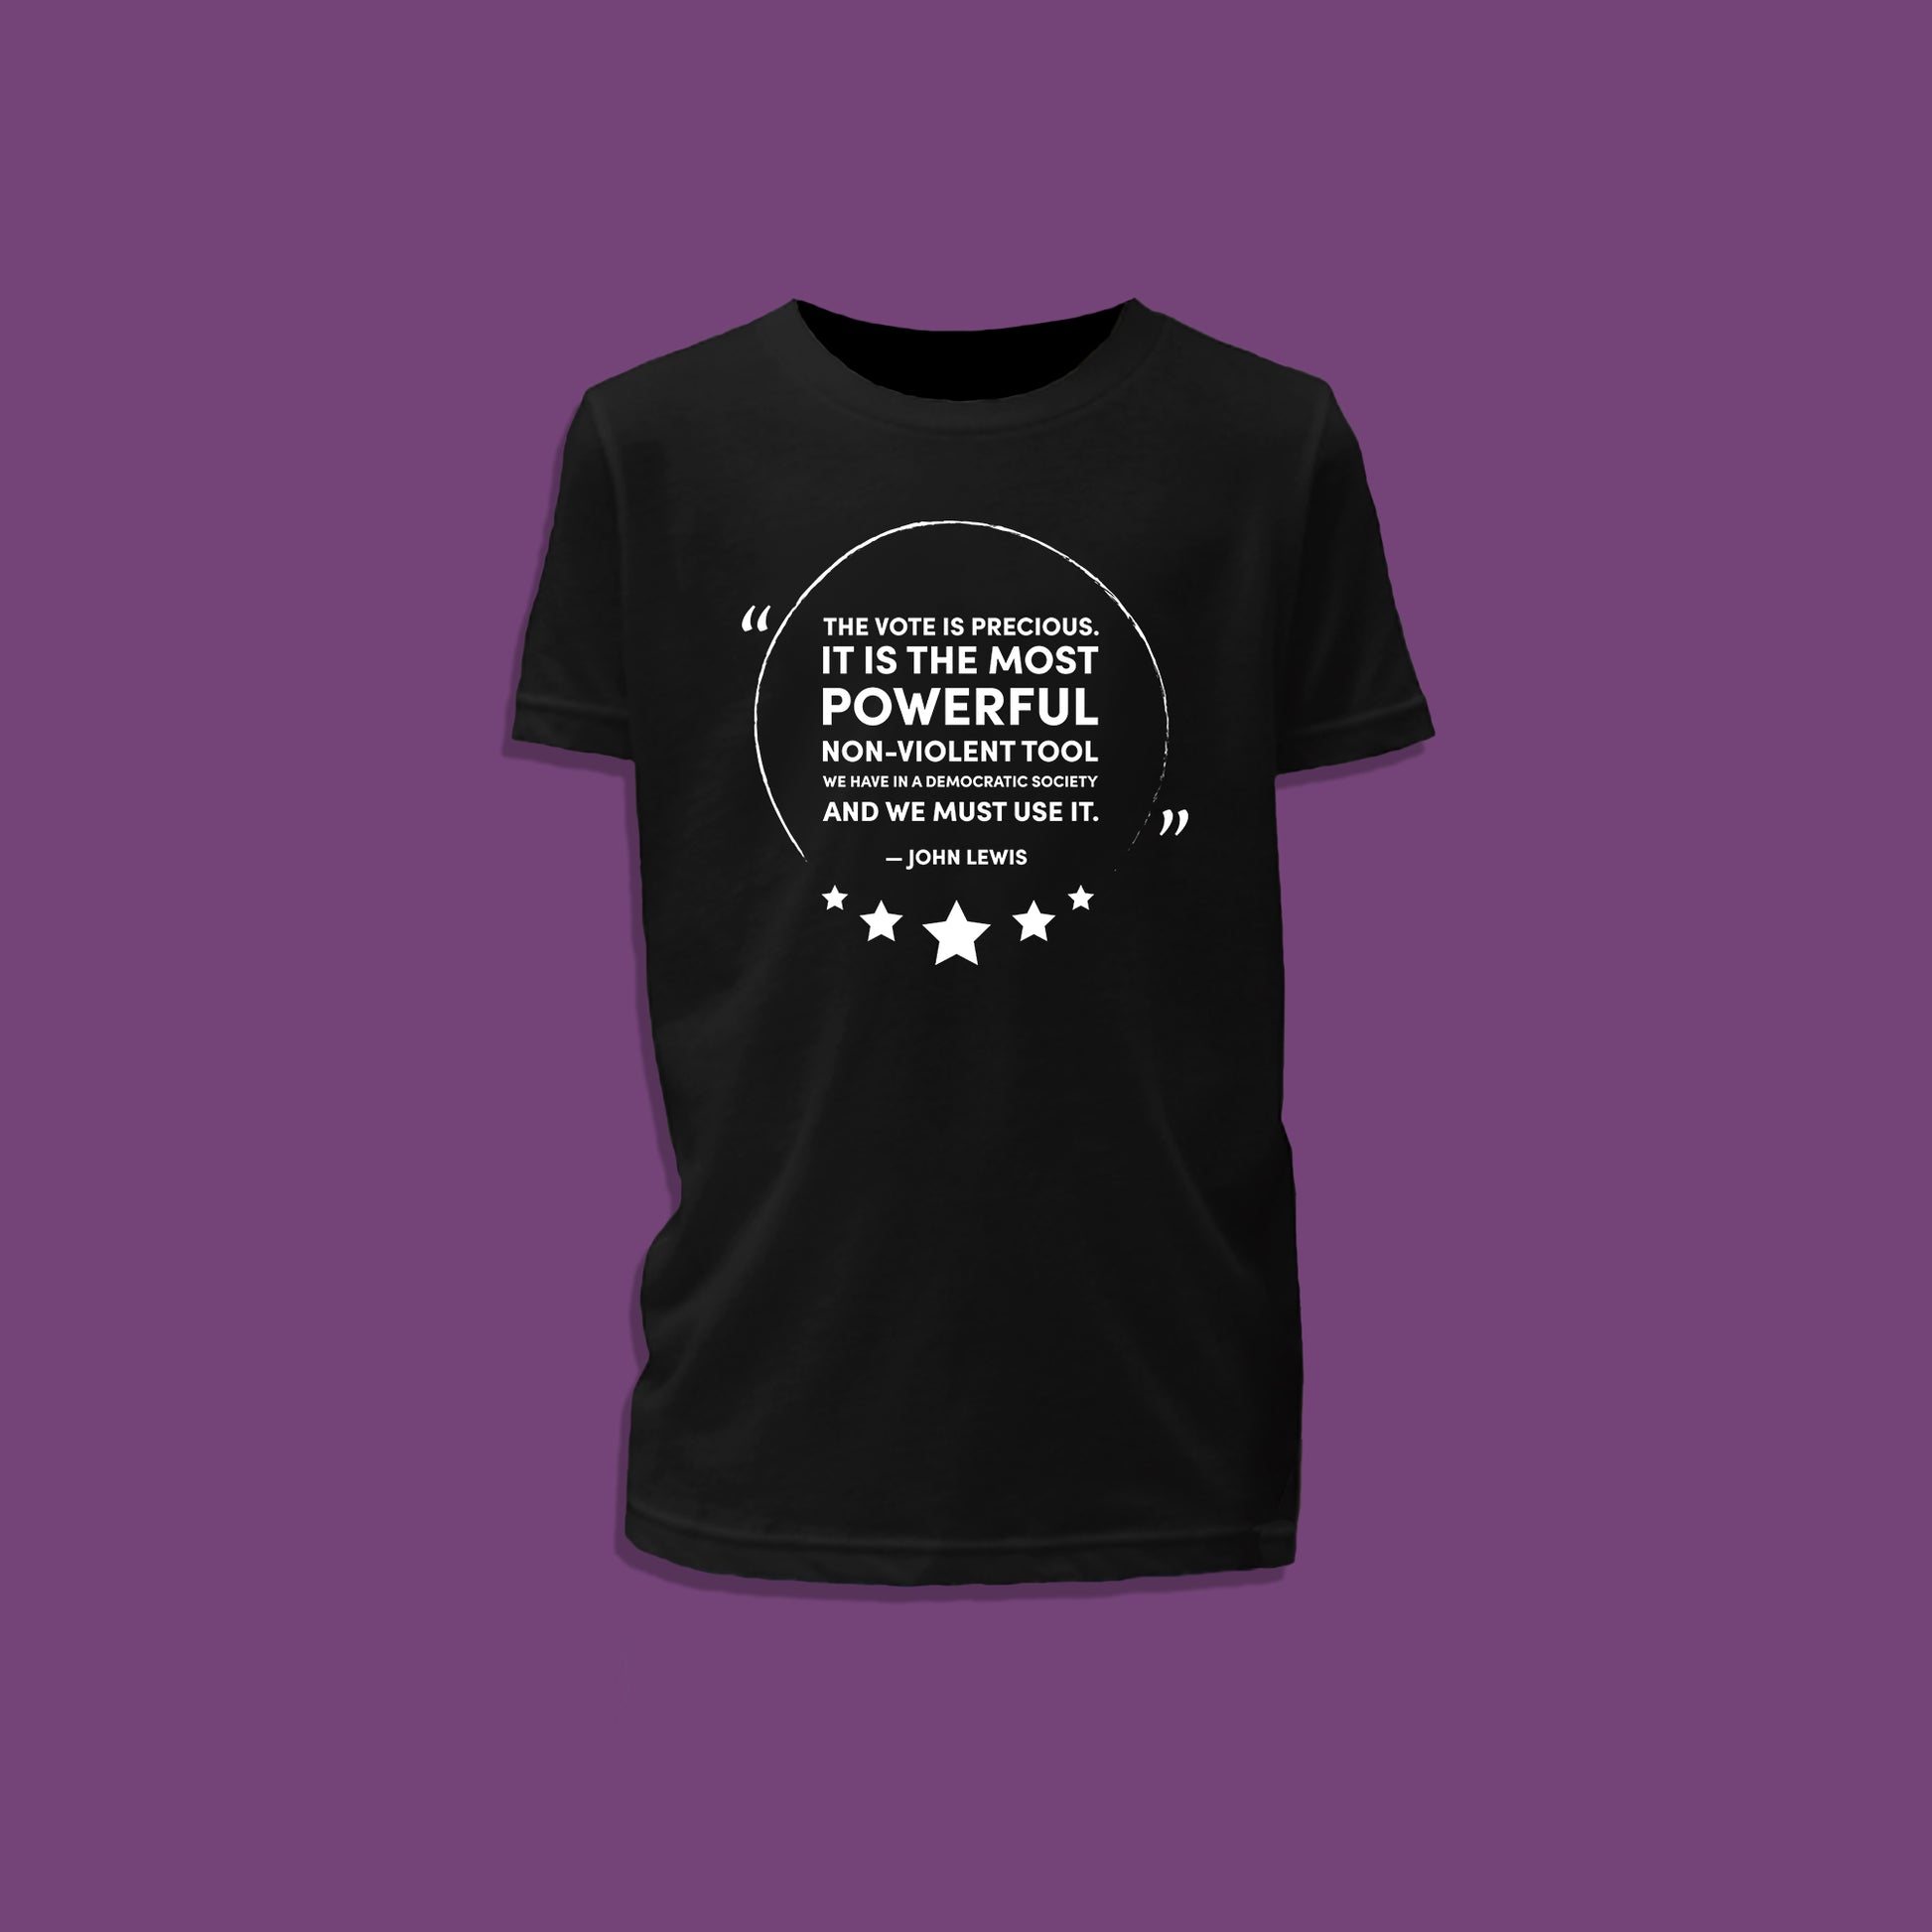 children's black t-shirt with quote from John Lewis, The vote is precious. It is the most powerful non-violent tool we have in a democratic society and we must use it.